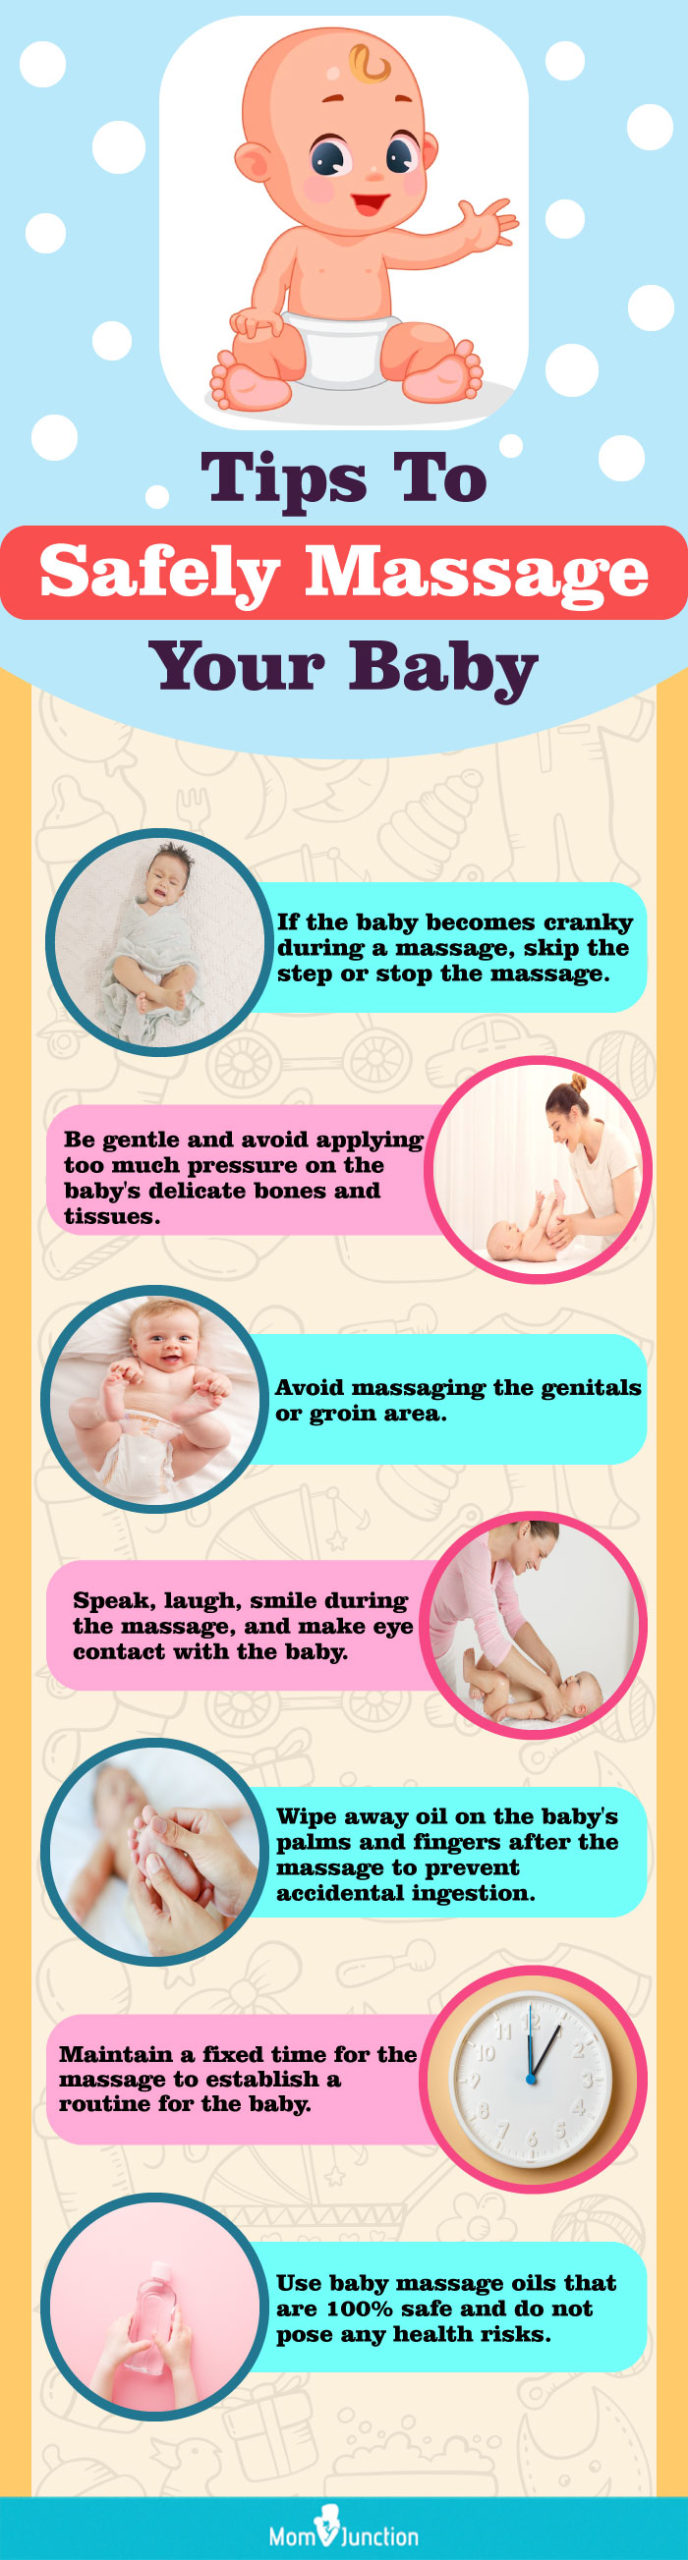 tips to safely massage your baby (infographic)